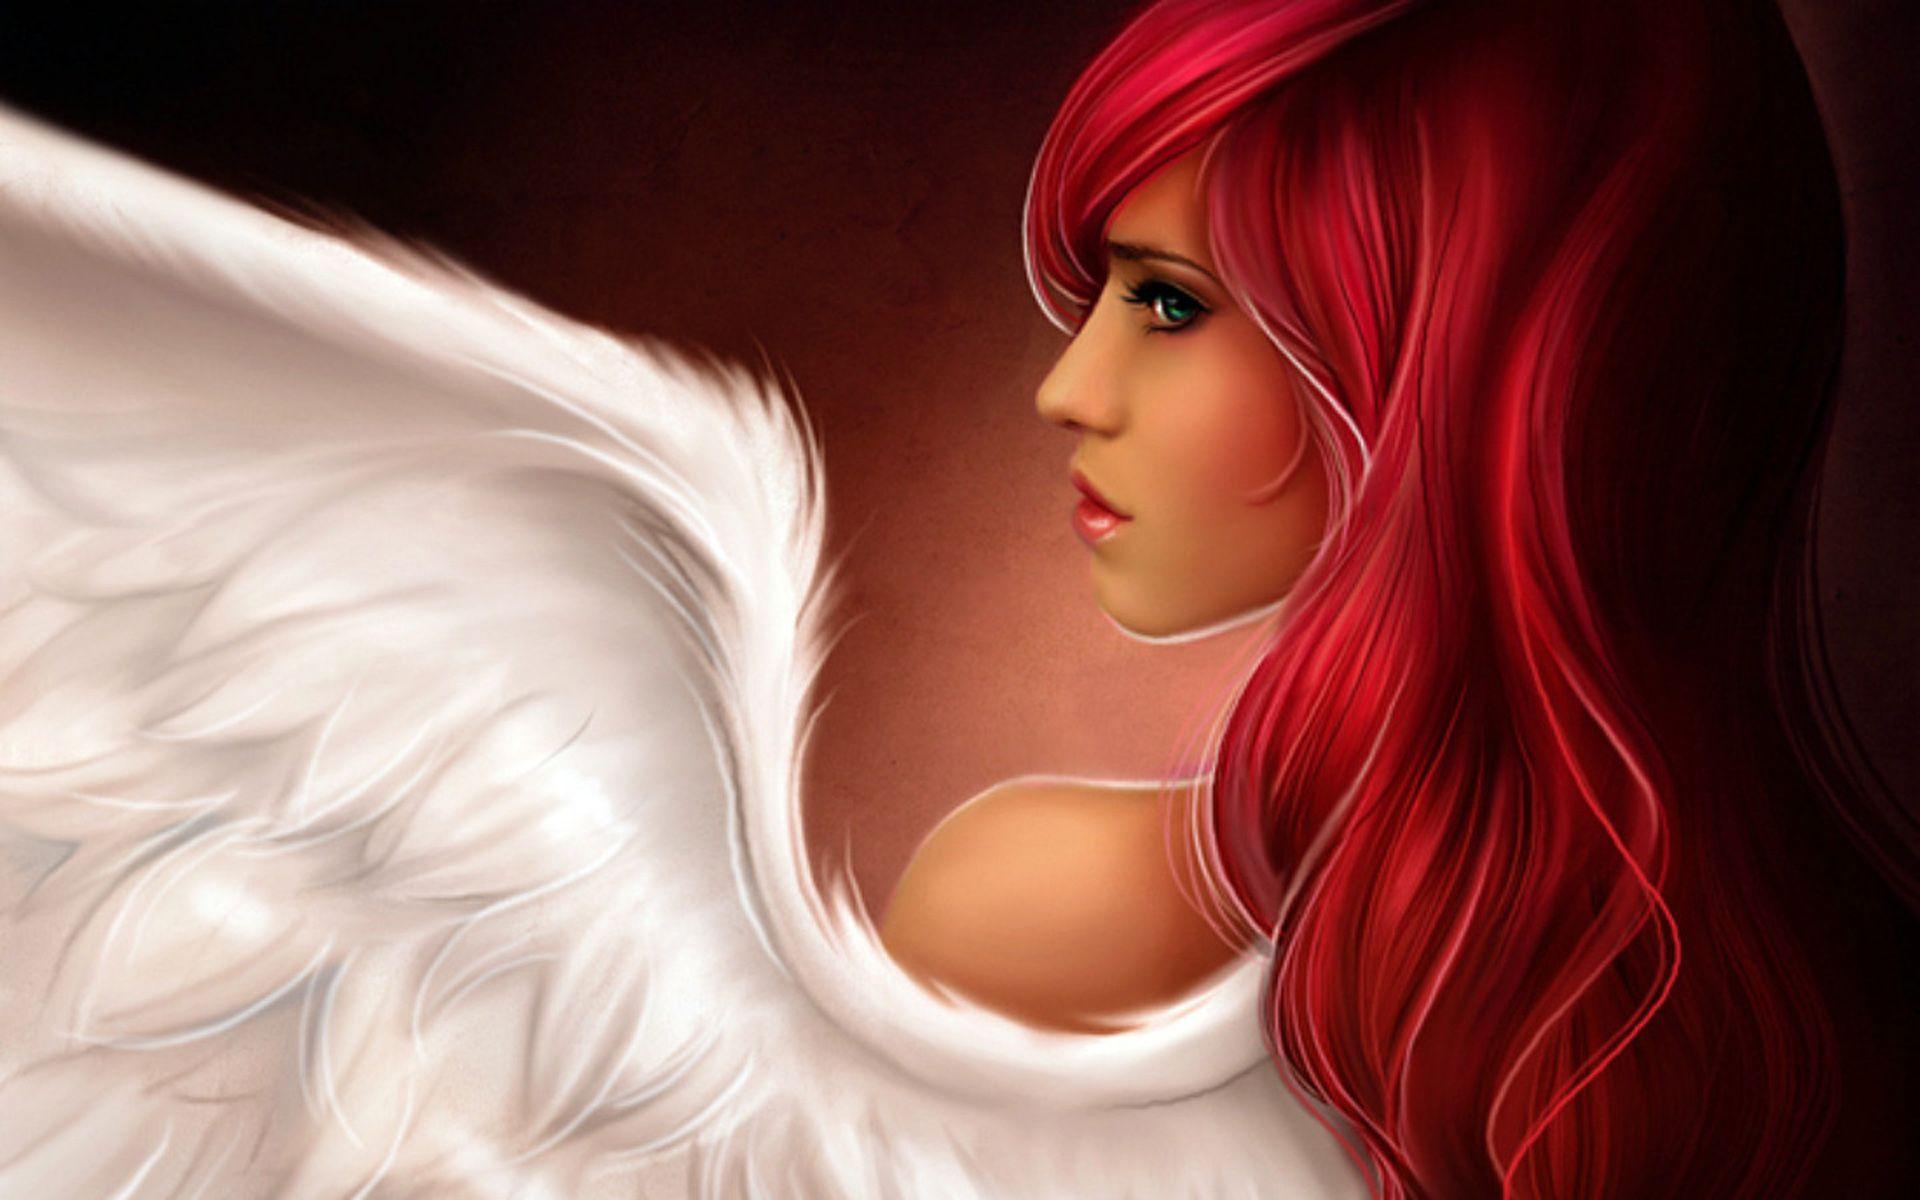 Girl with Red Hair and Angel Wings widescreen wallpaper. Wide